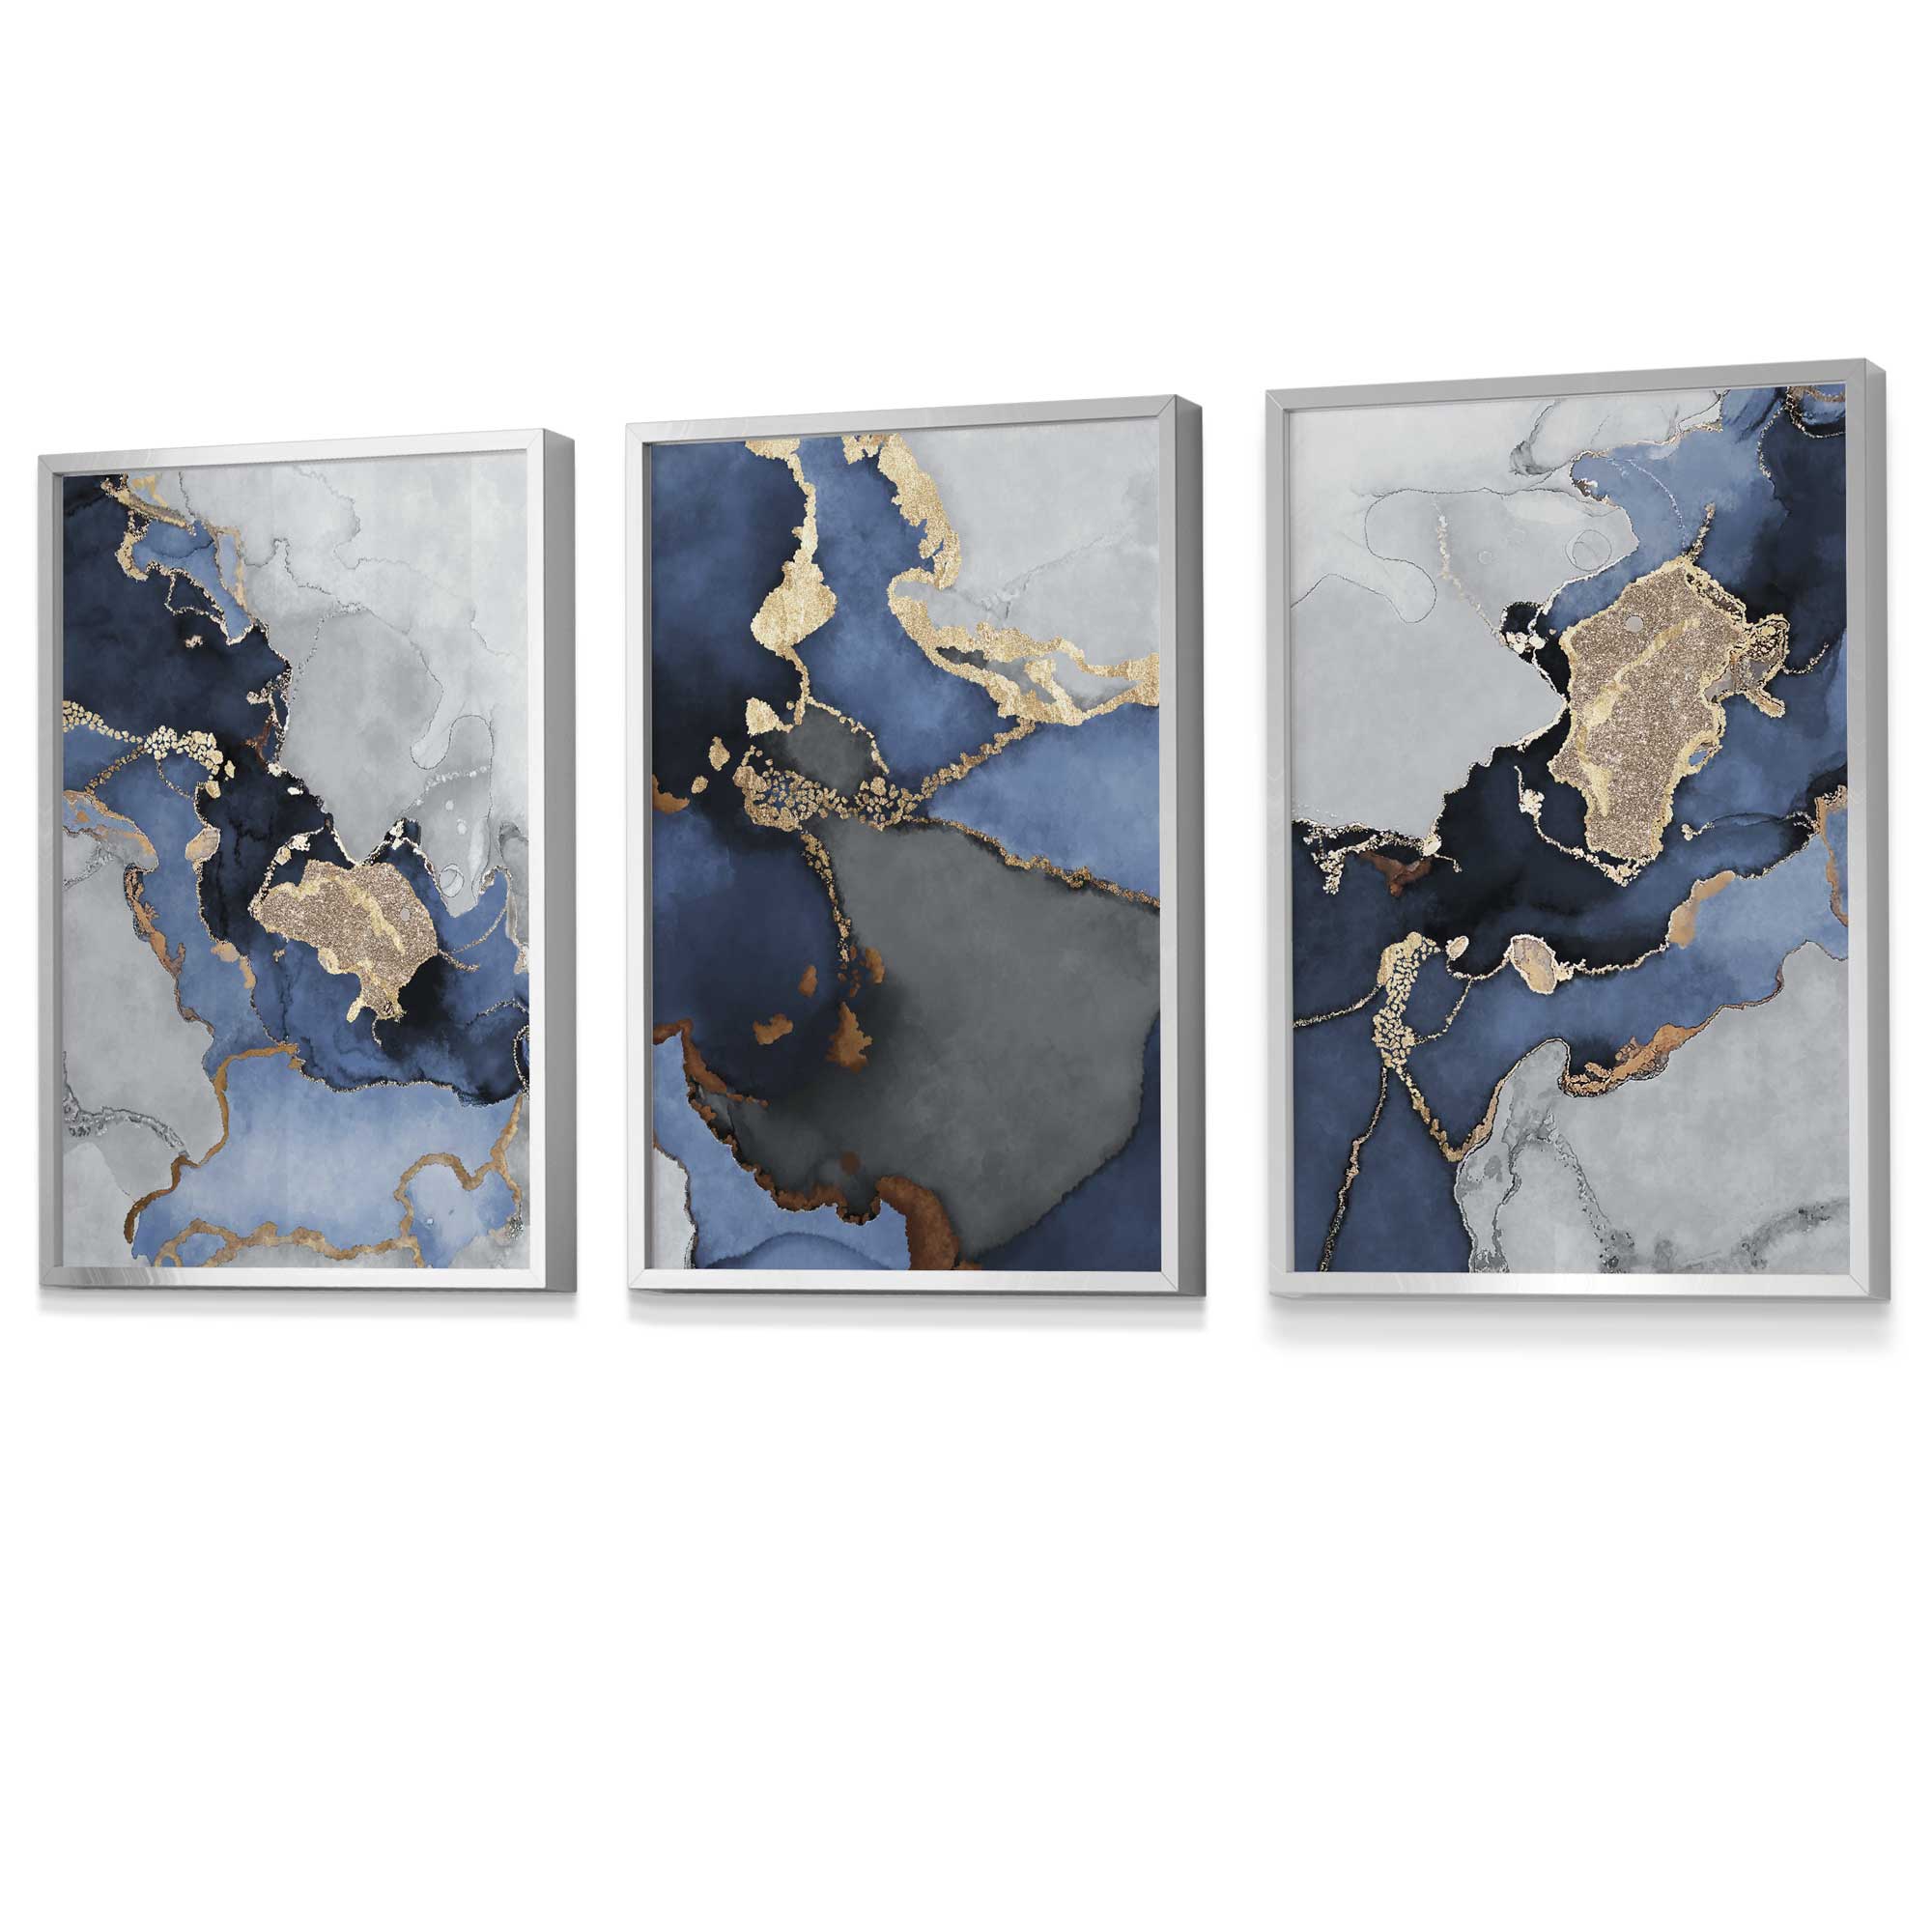 Framed Set of 3 Navy and Silver Abstract Art Prints | Artze Wall Art UK